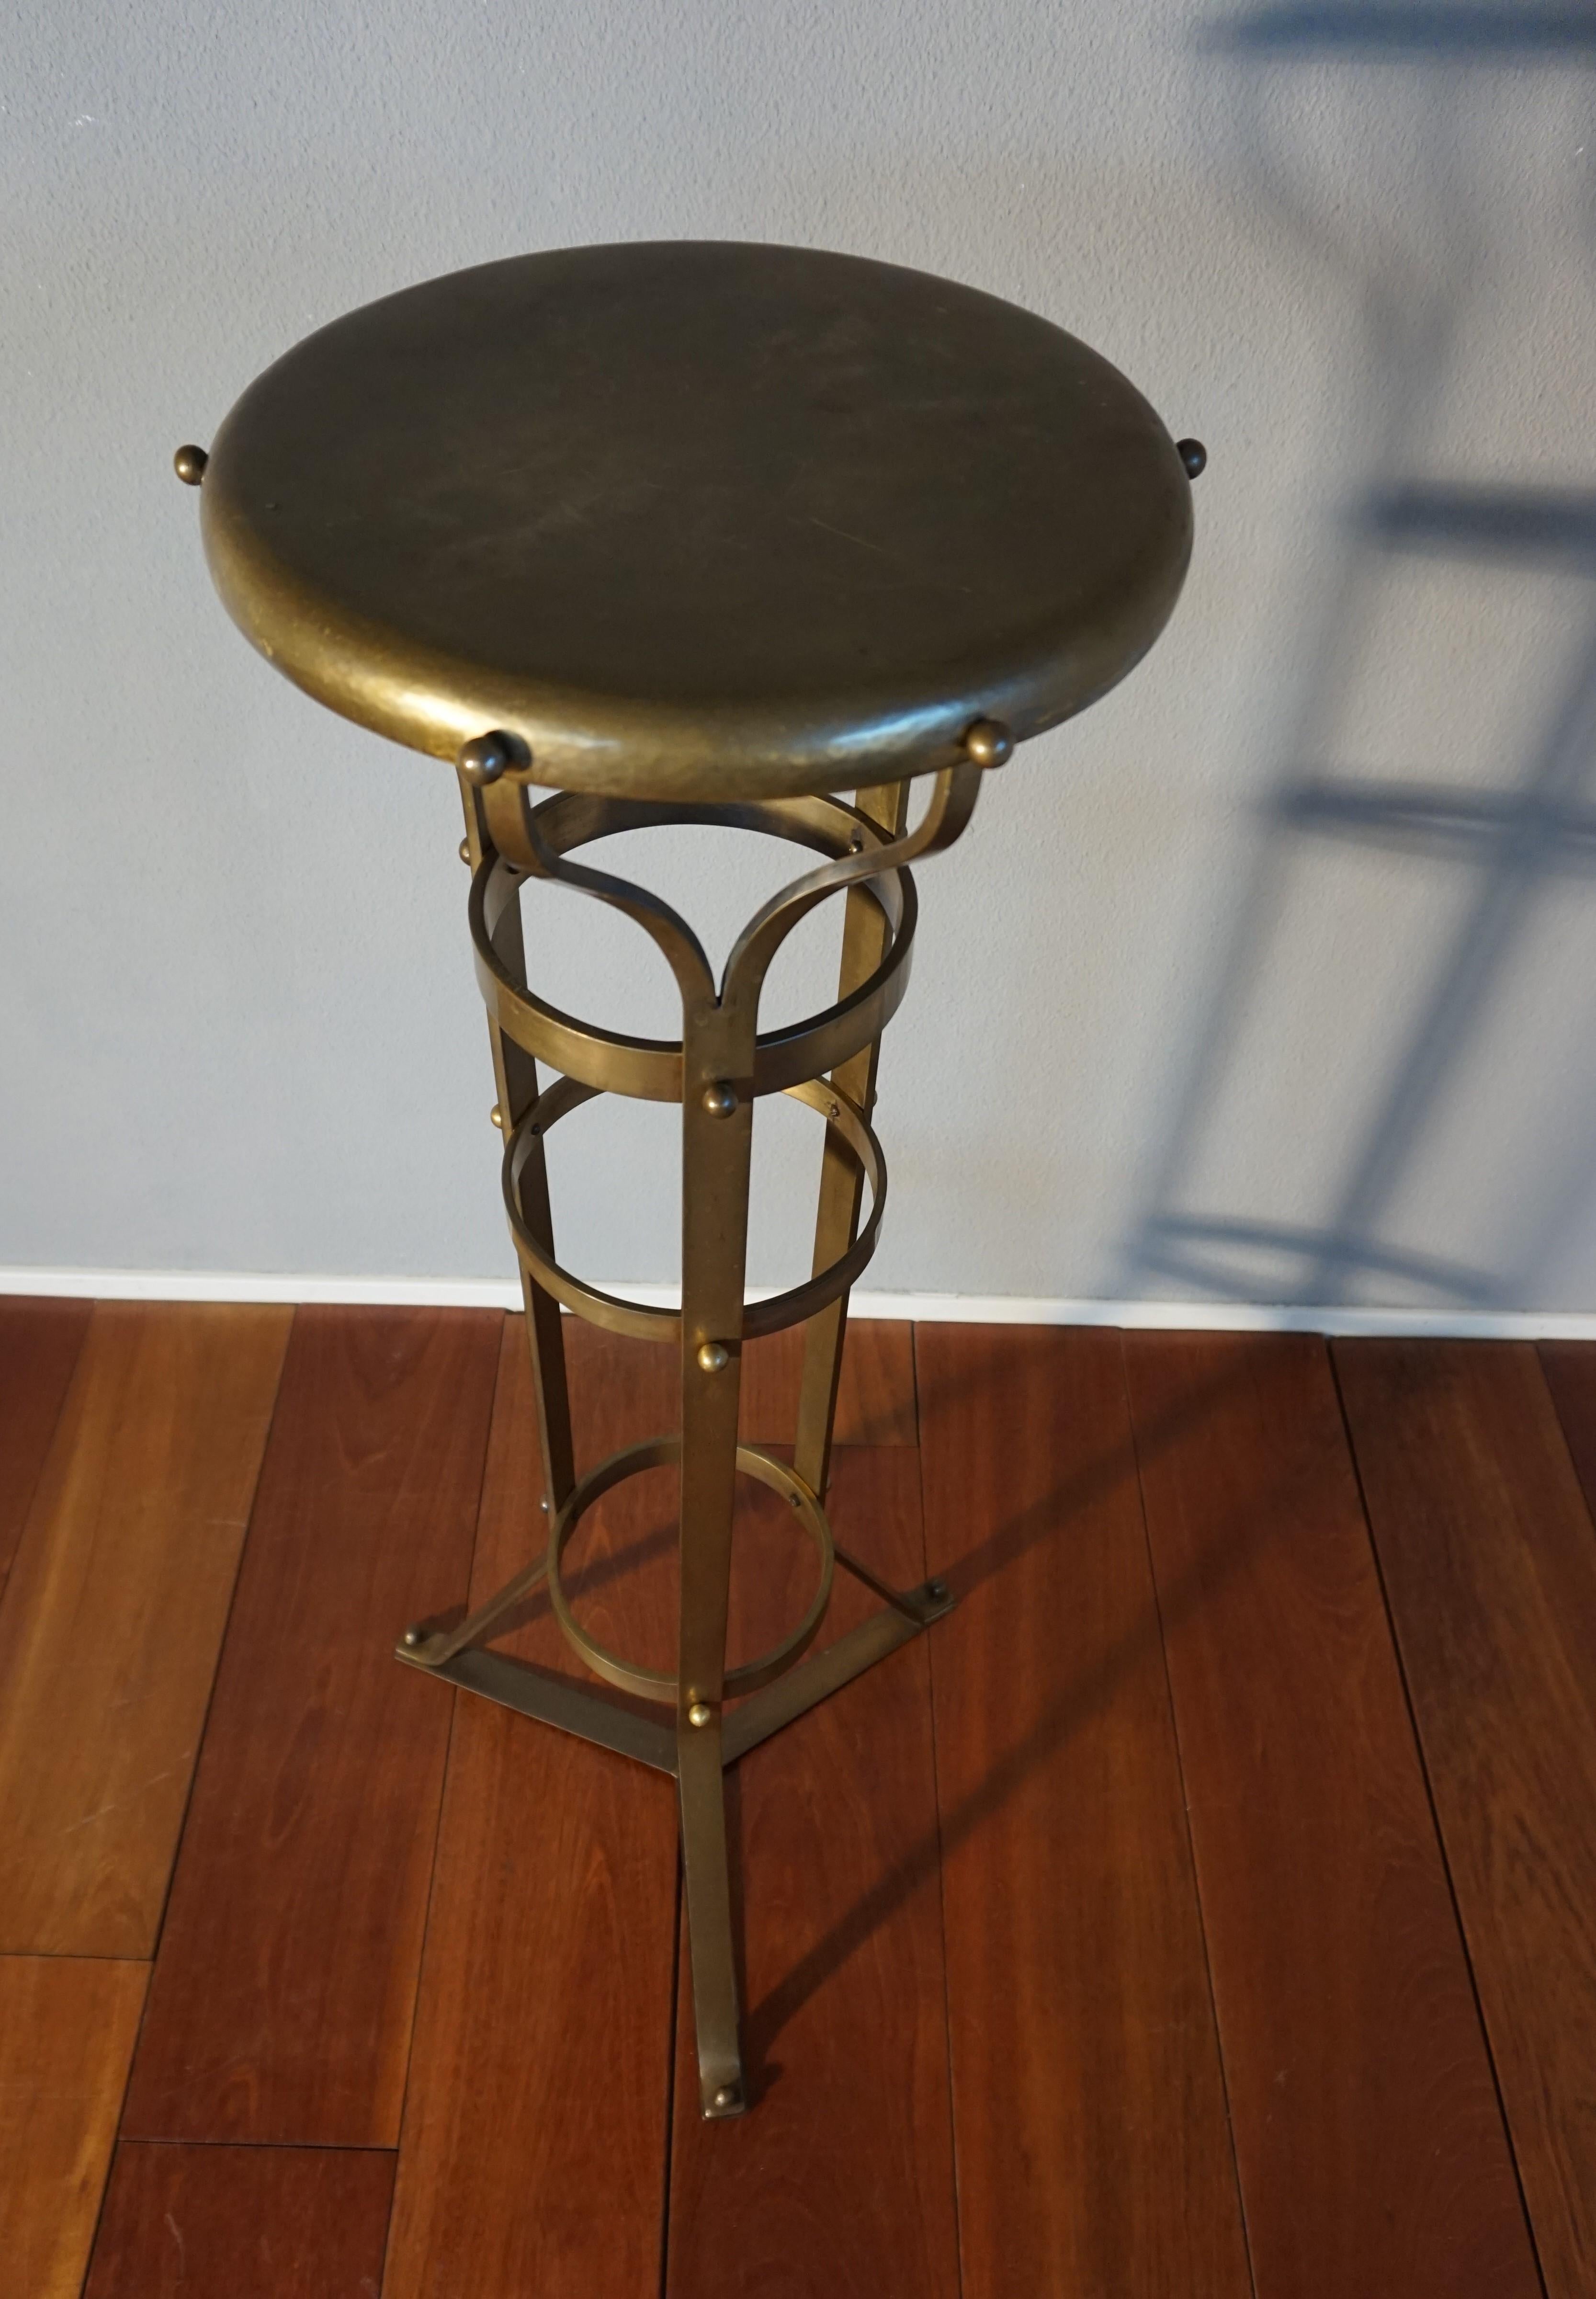 Striking and Top Quality Made Solid Brass Arts & Crafts Pedestal Sculpture Stand 2